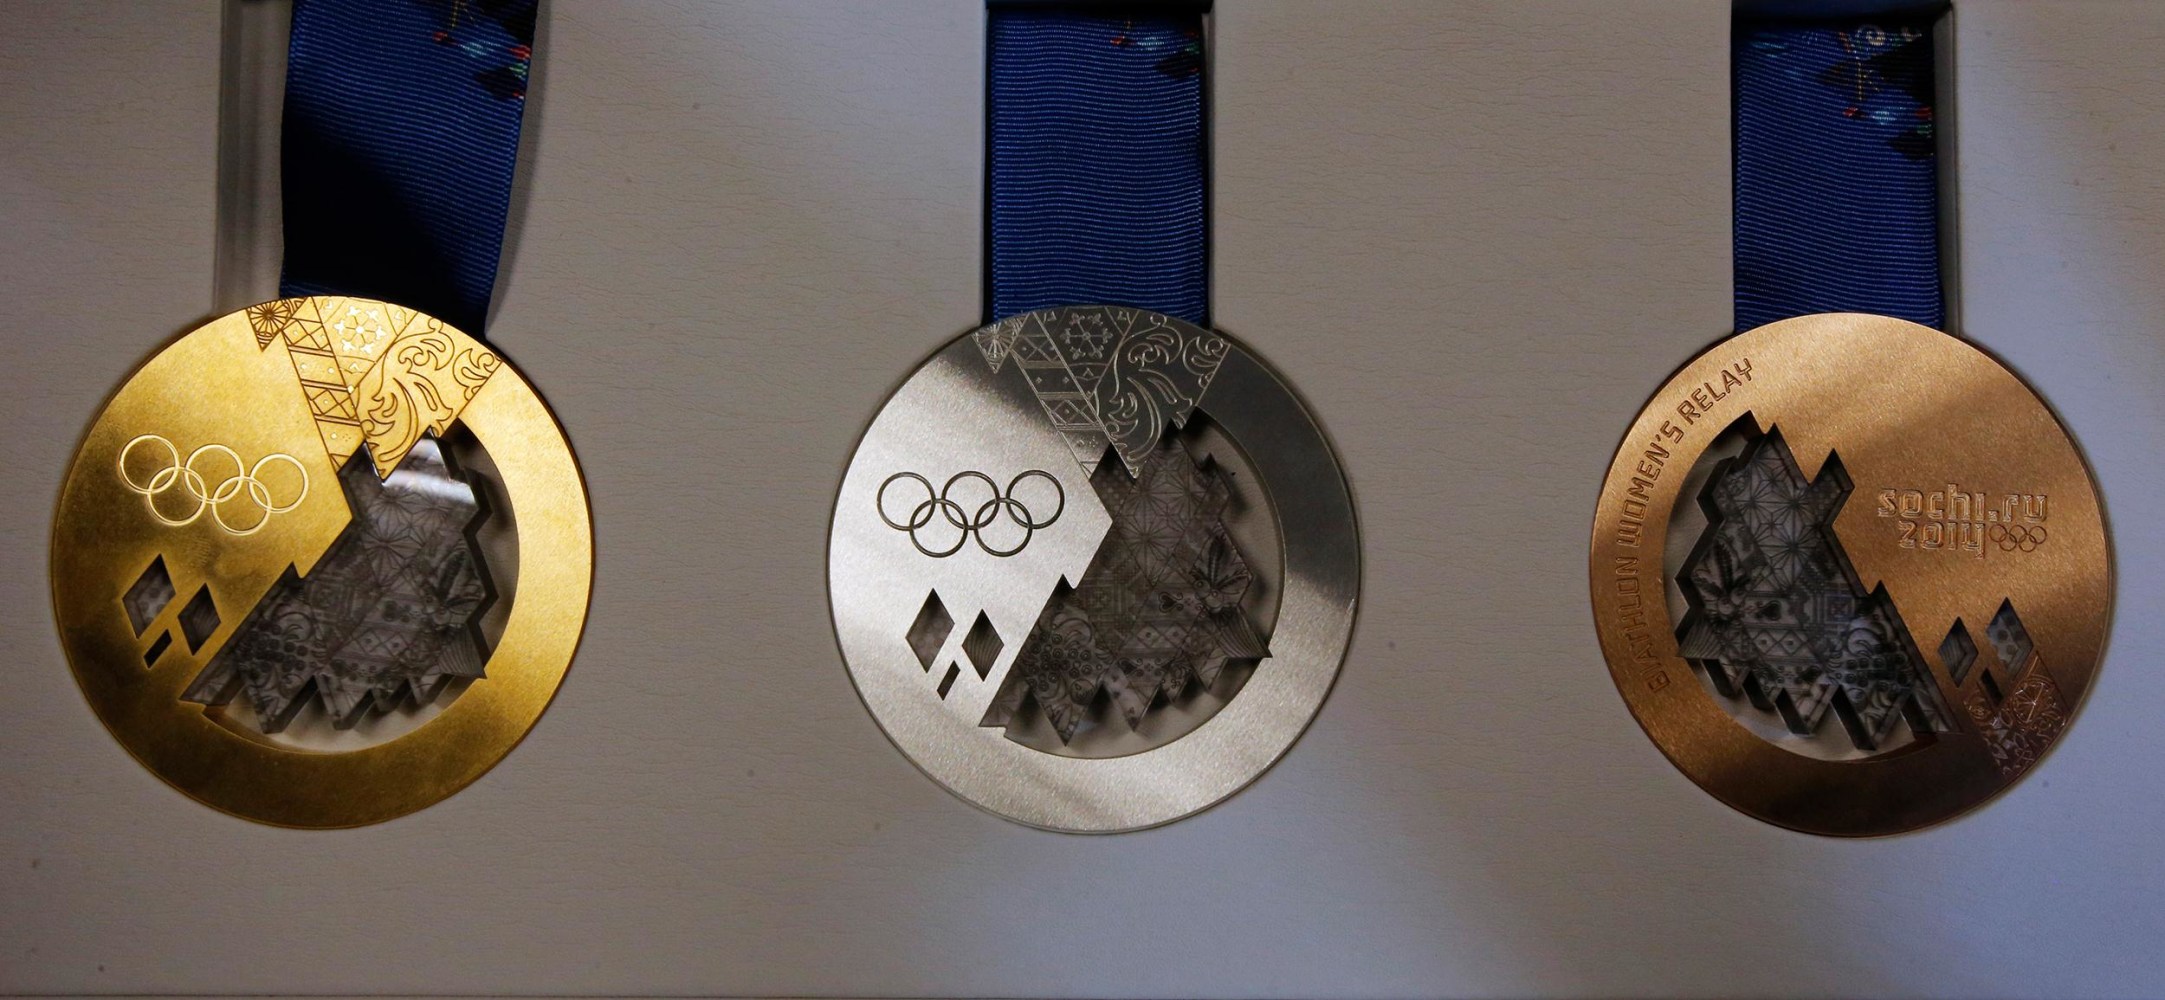 Olympians, THE OLYMPIC CHAMPIONS BITE THEIR MEDALS